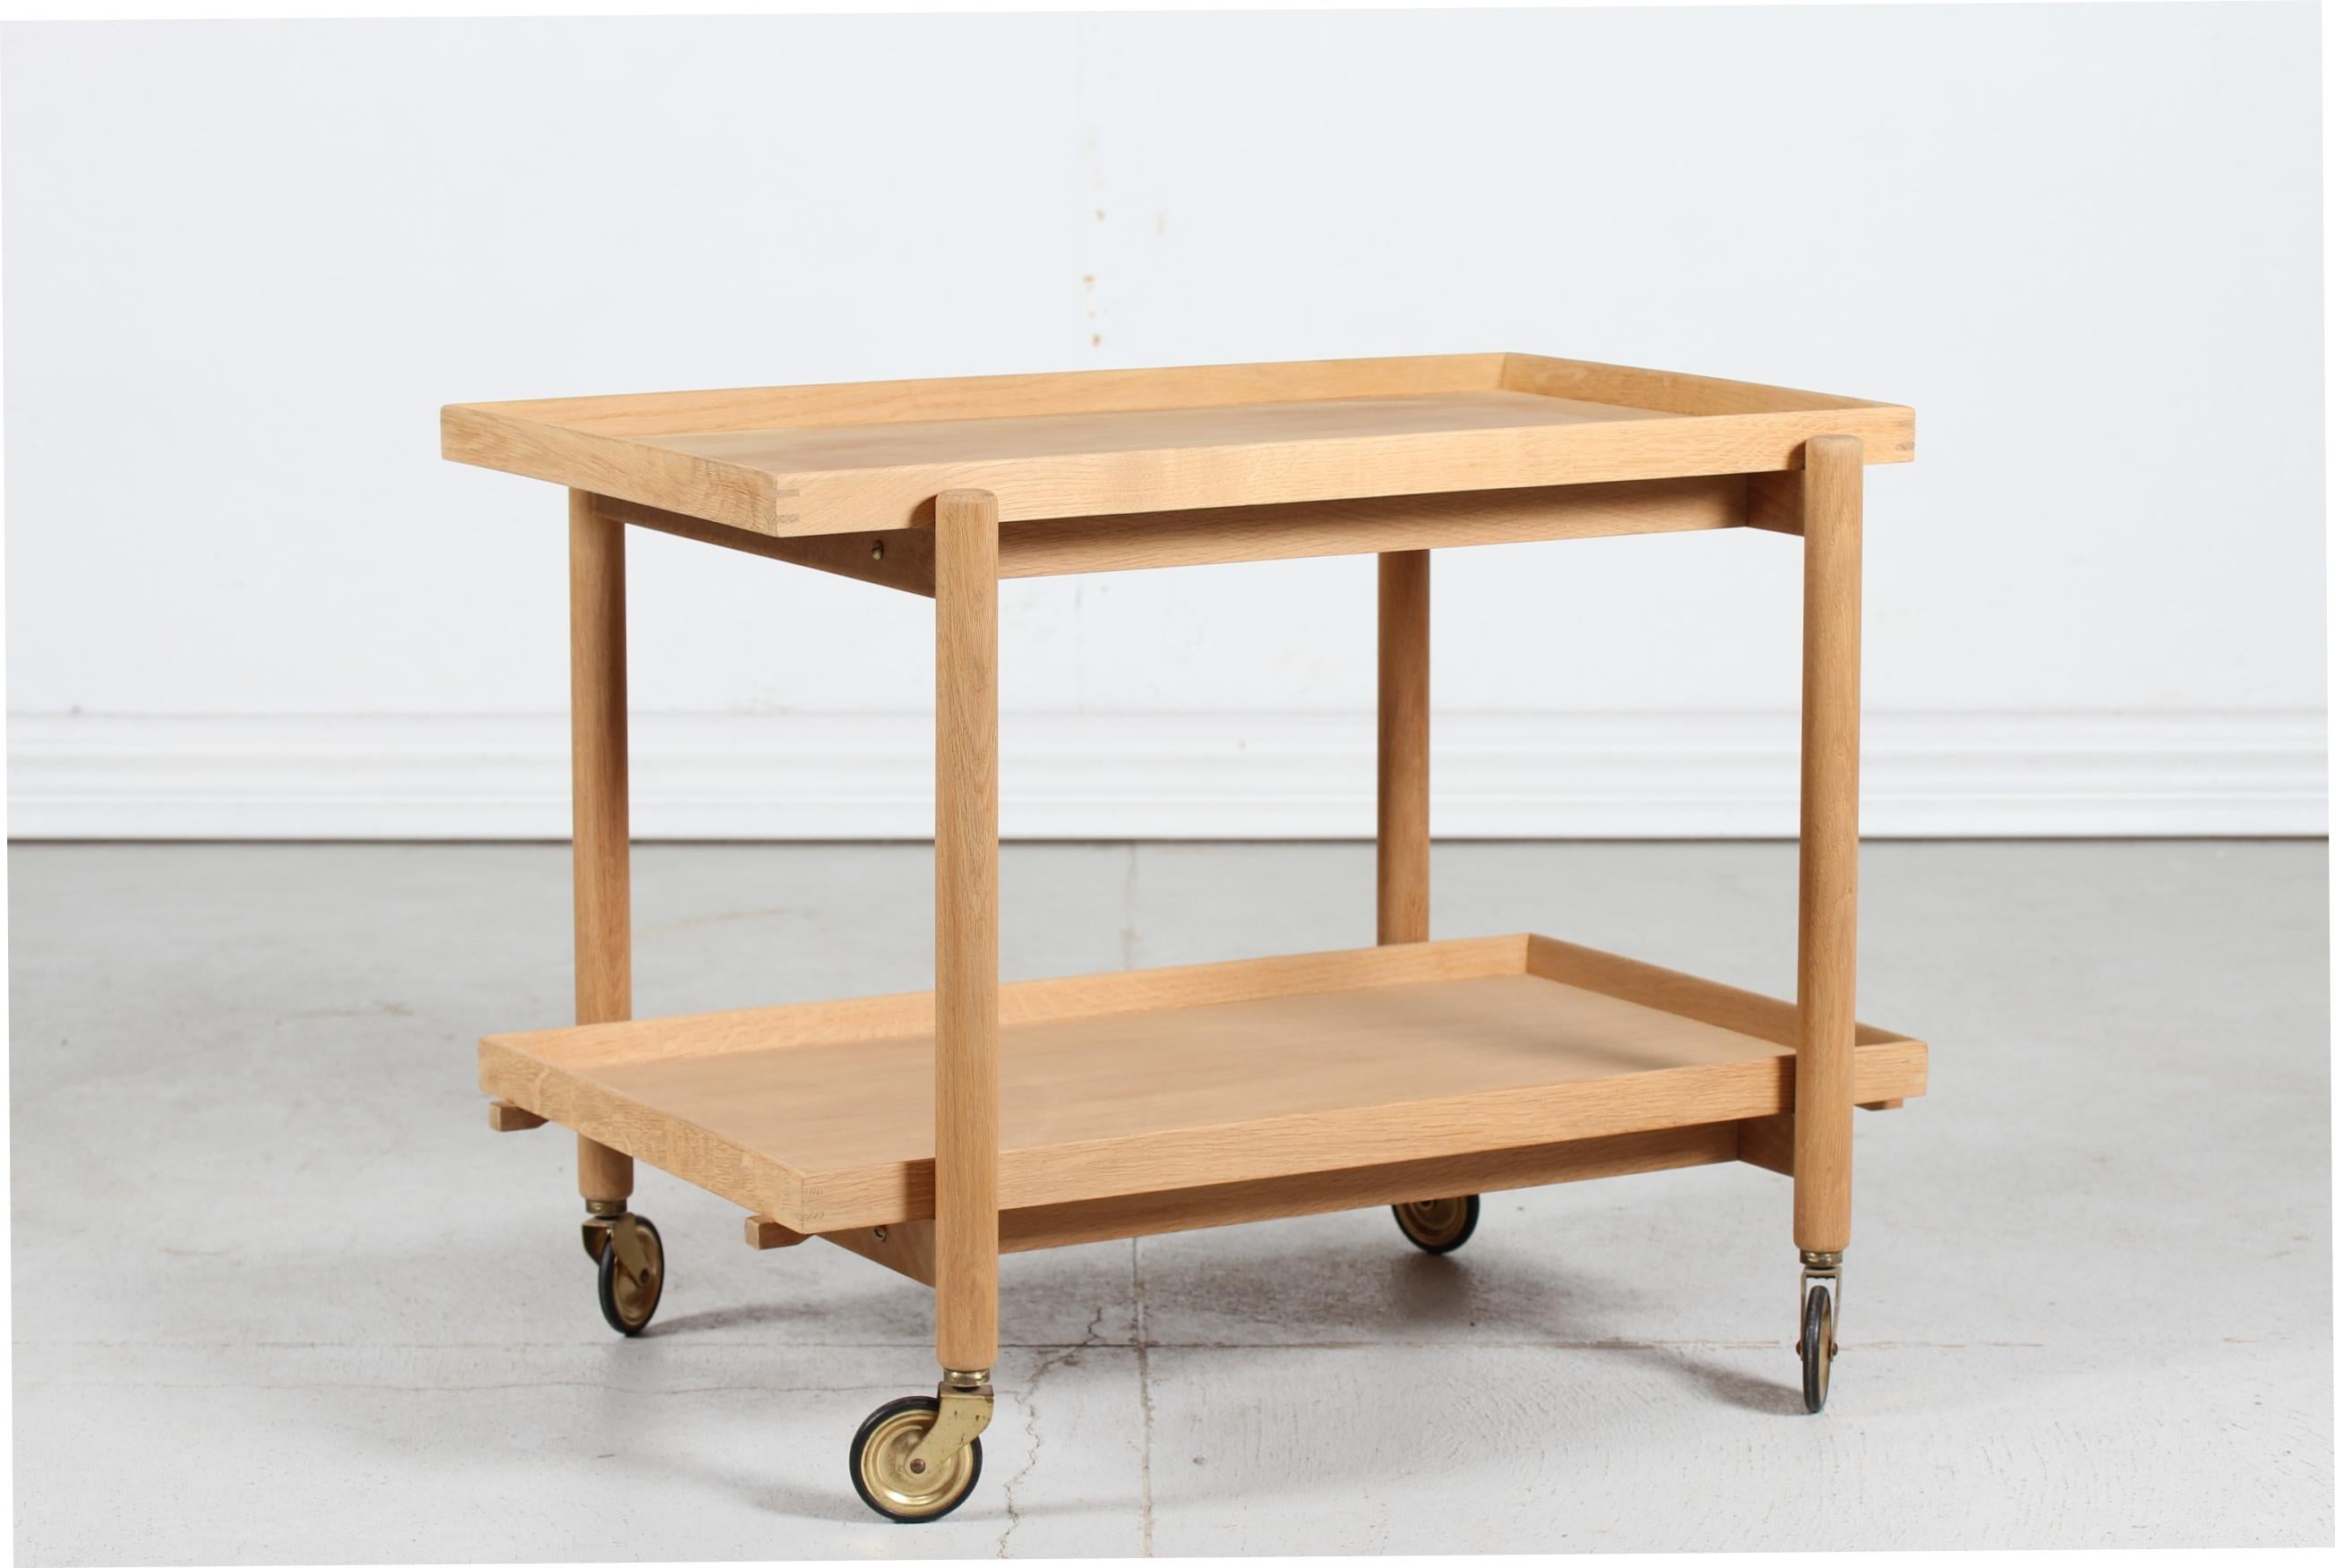 Poul Hunnevad expandable bar trolley/serving cart trolley with two trays from the 1970´s
It's made of oak, solid and veneer, with soap treatment on four metal wheels with grey rubber.
The two trays can be put in line to make an extended table